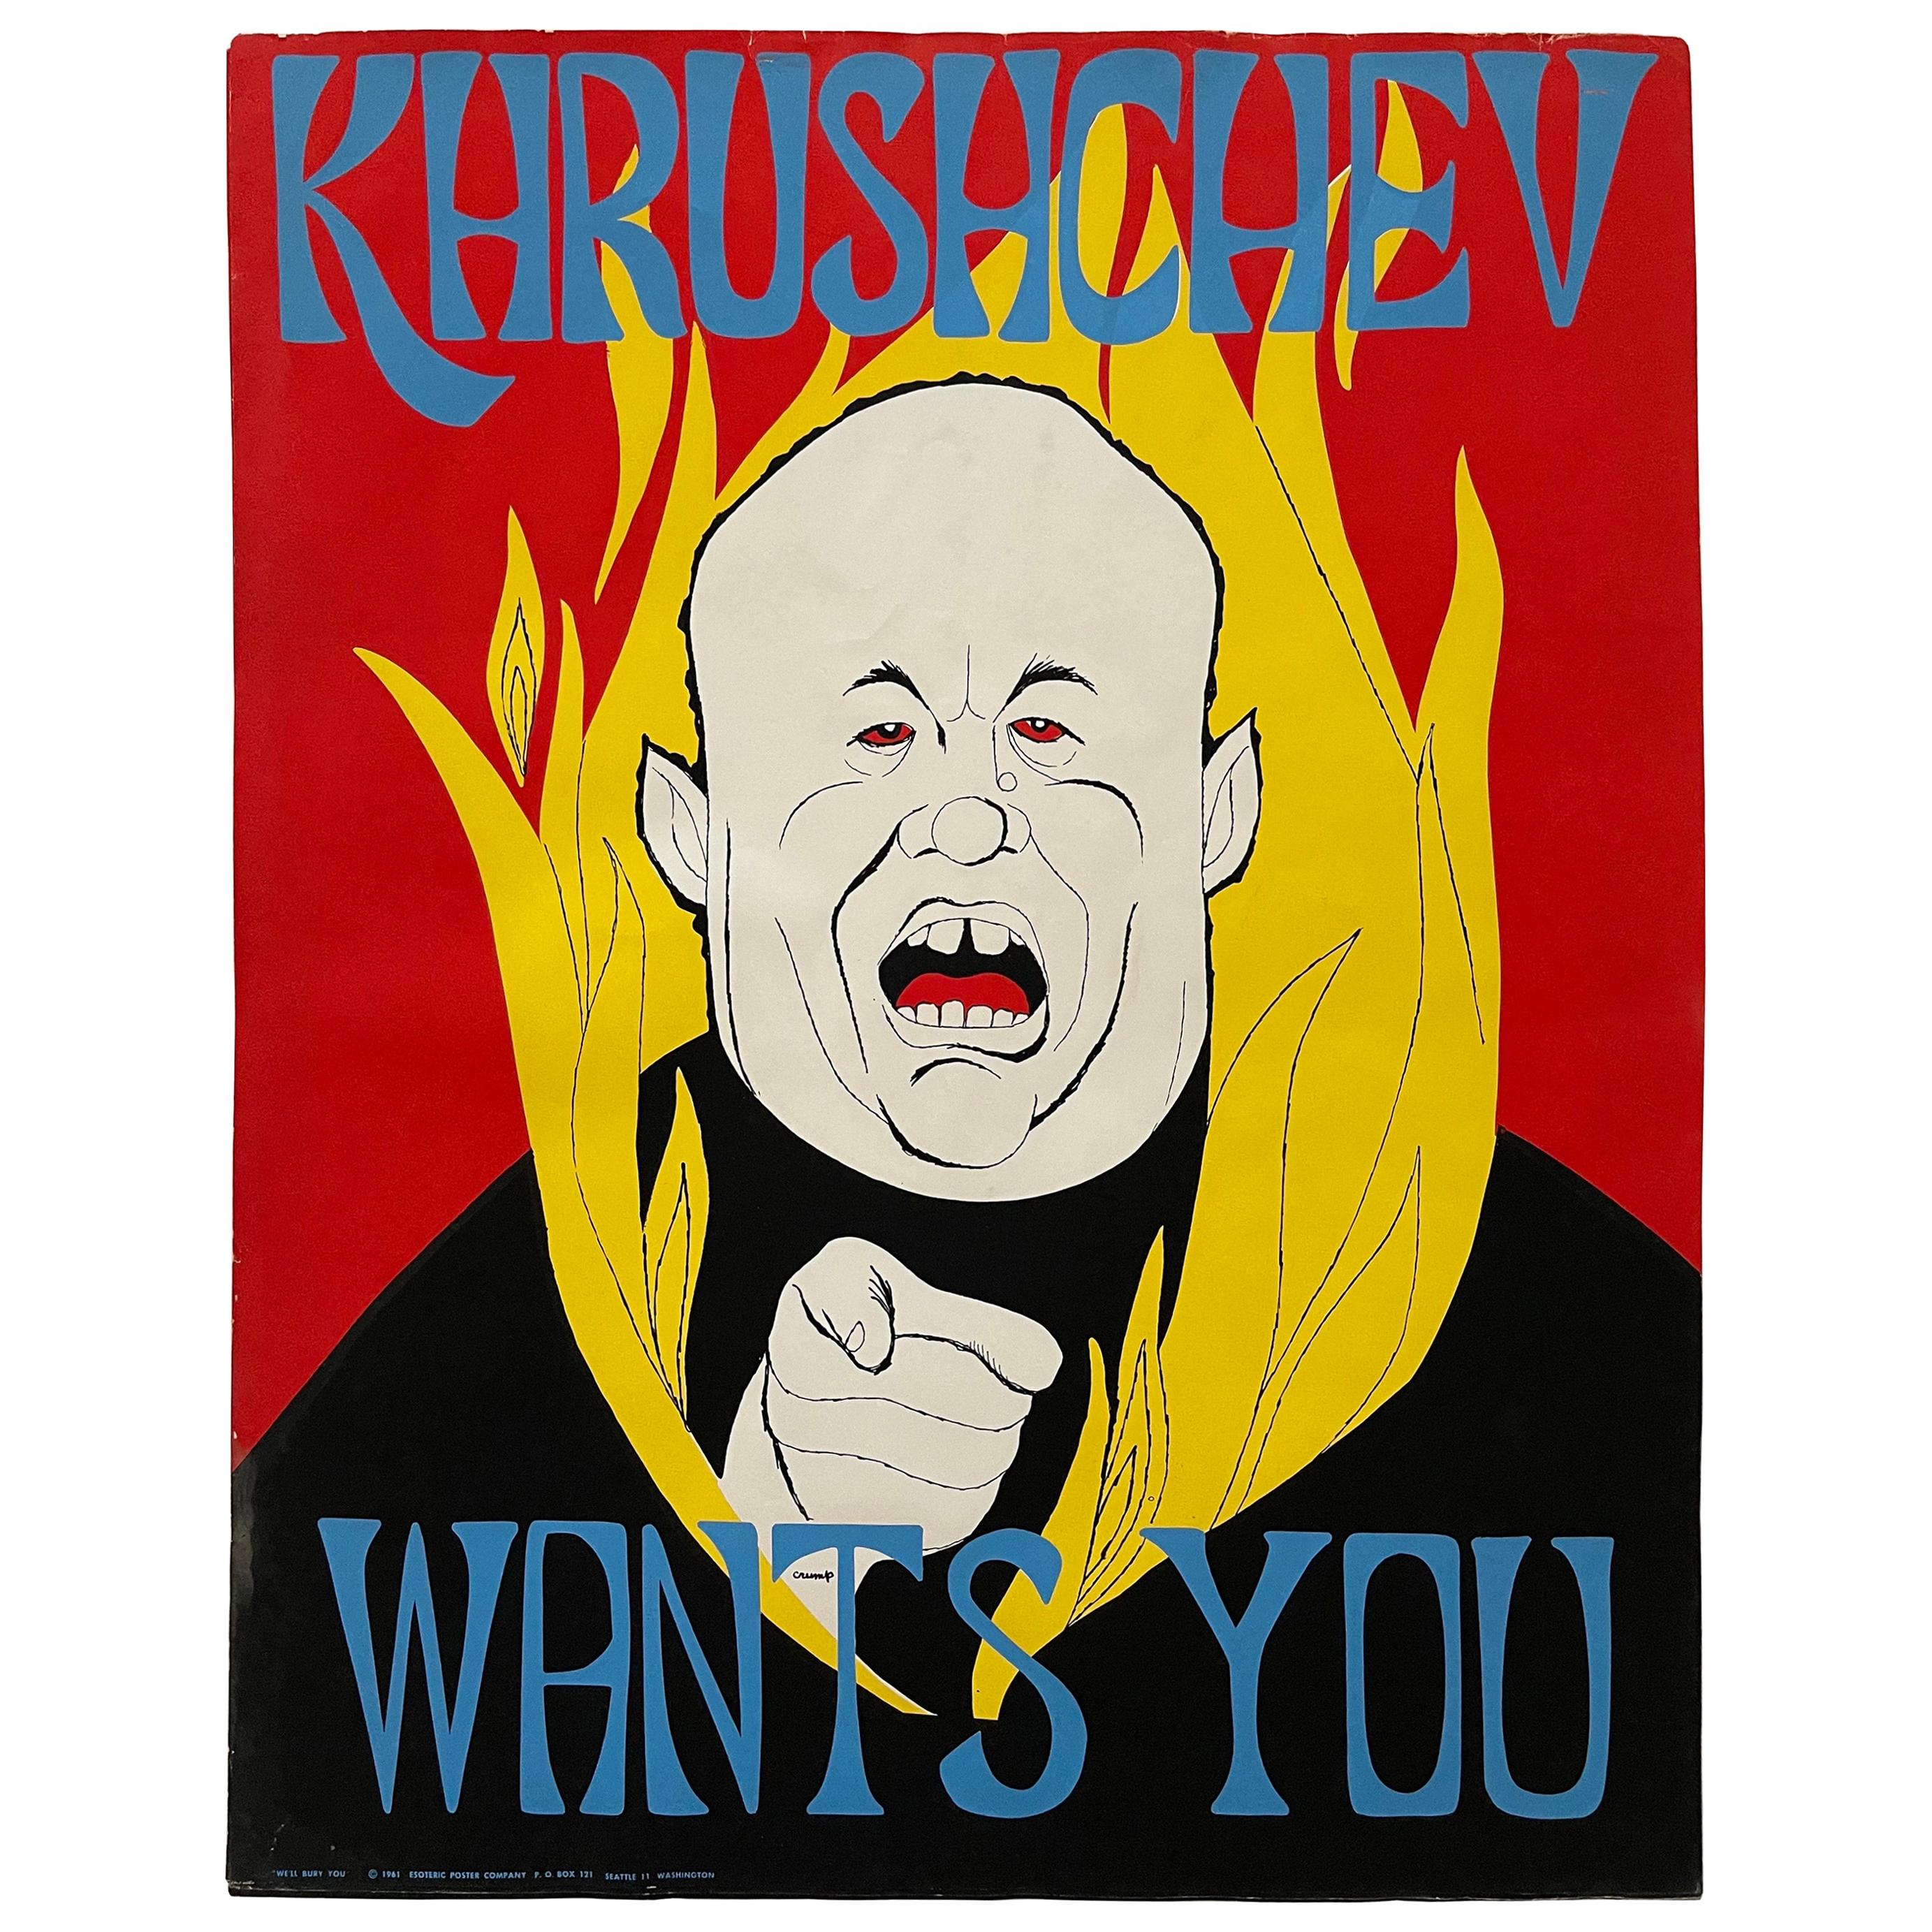 Vintage Cold War Propaganda Poster "Khrushchev Wants You" by Rolly Crump For Sale